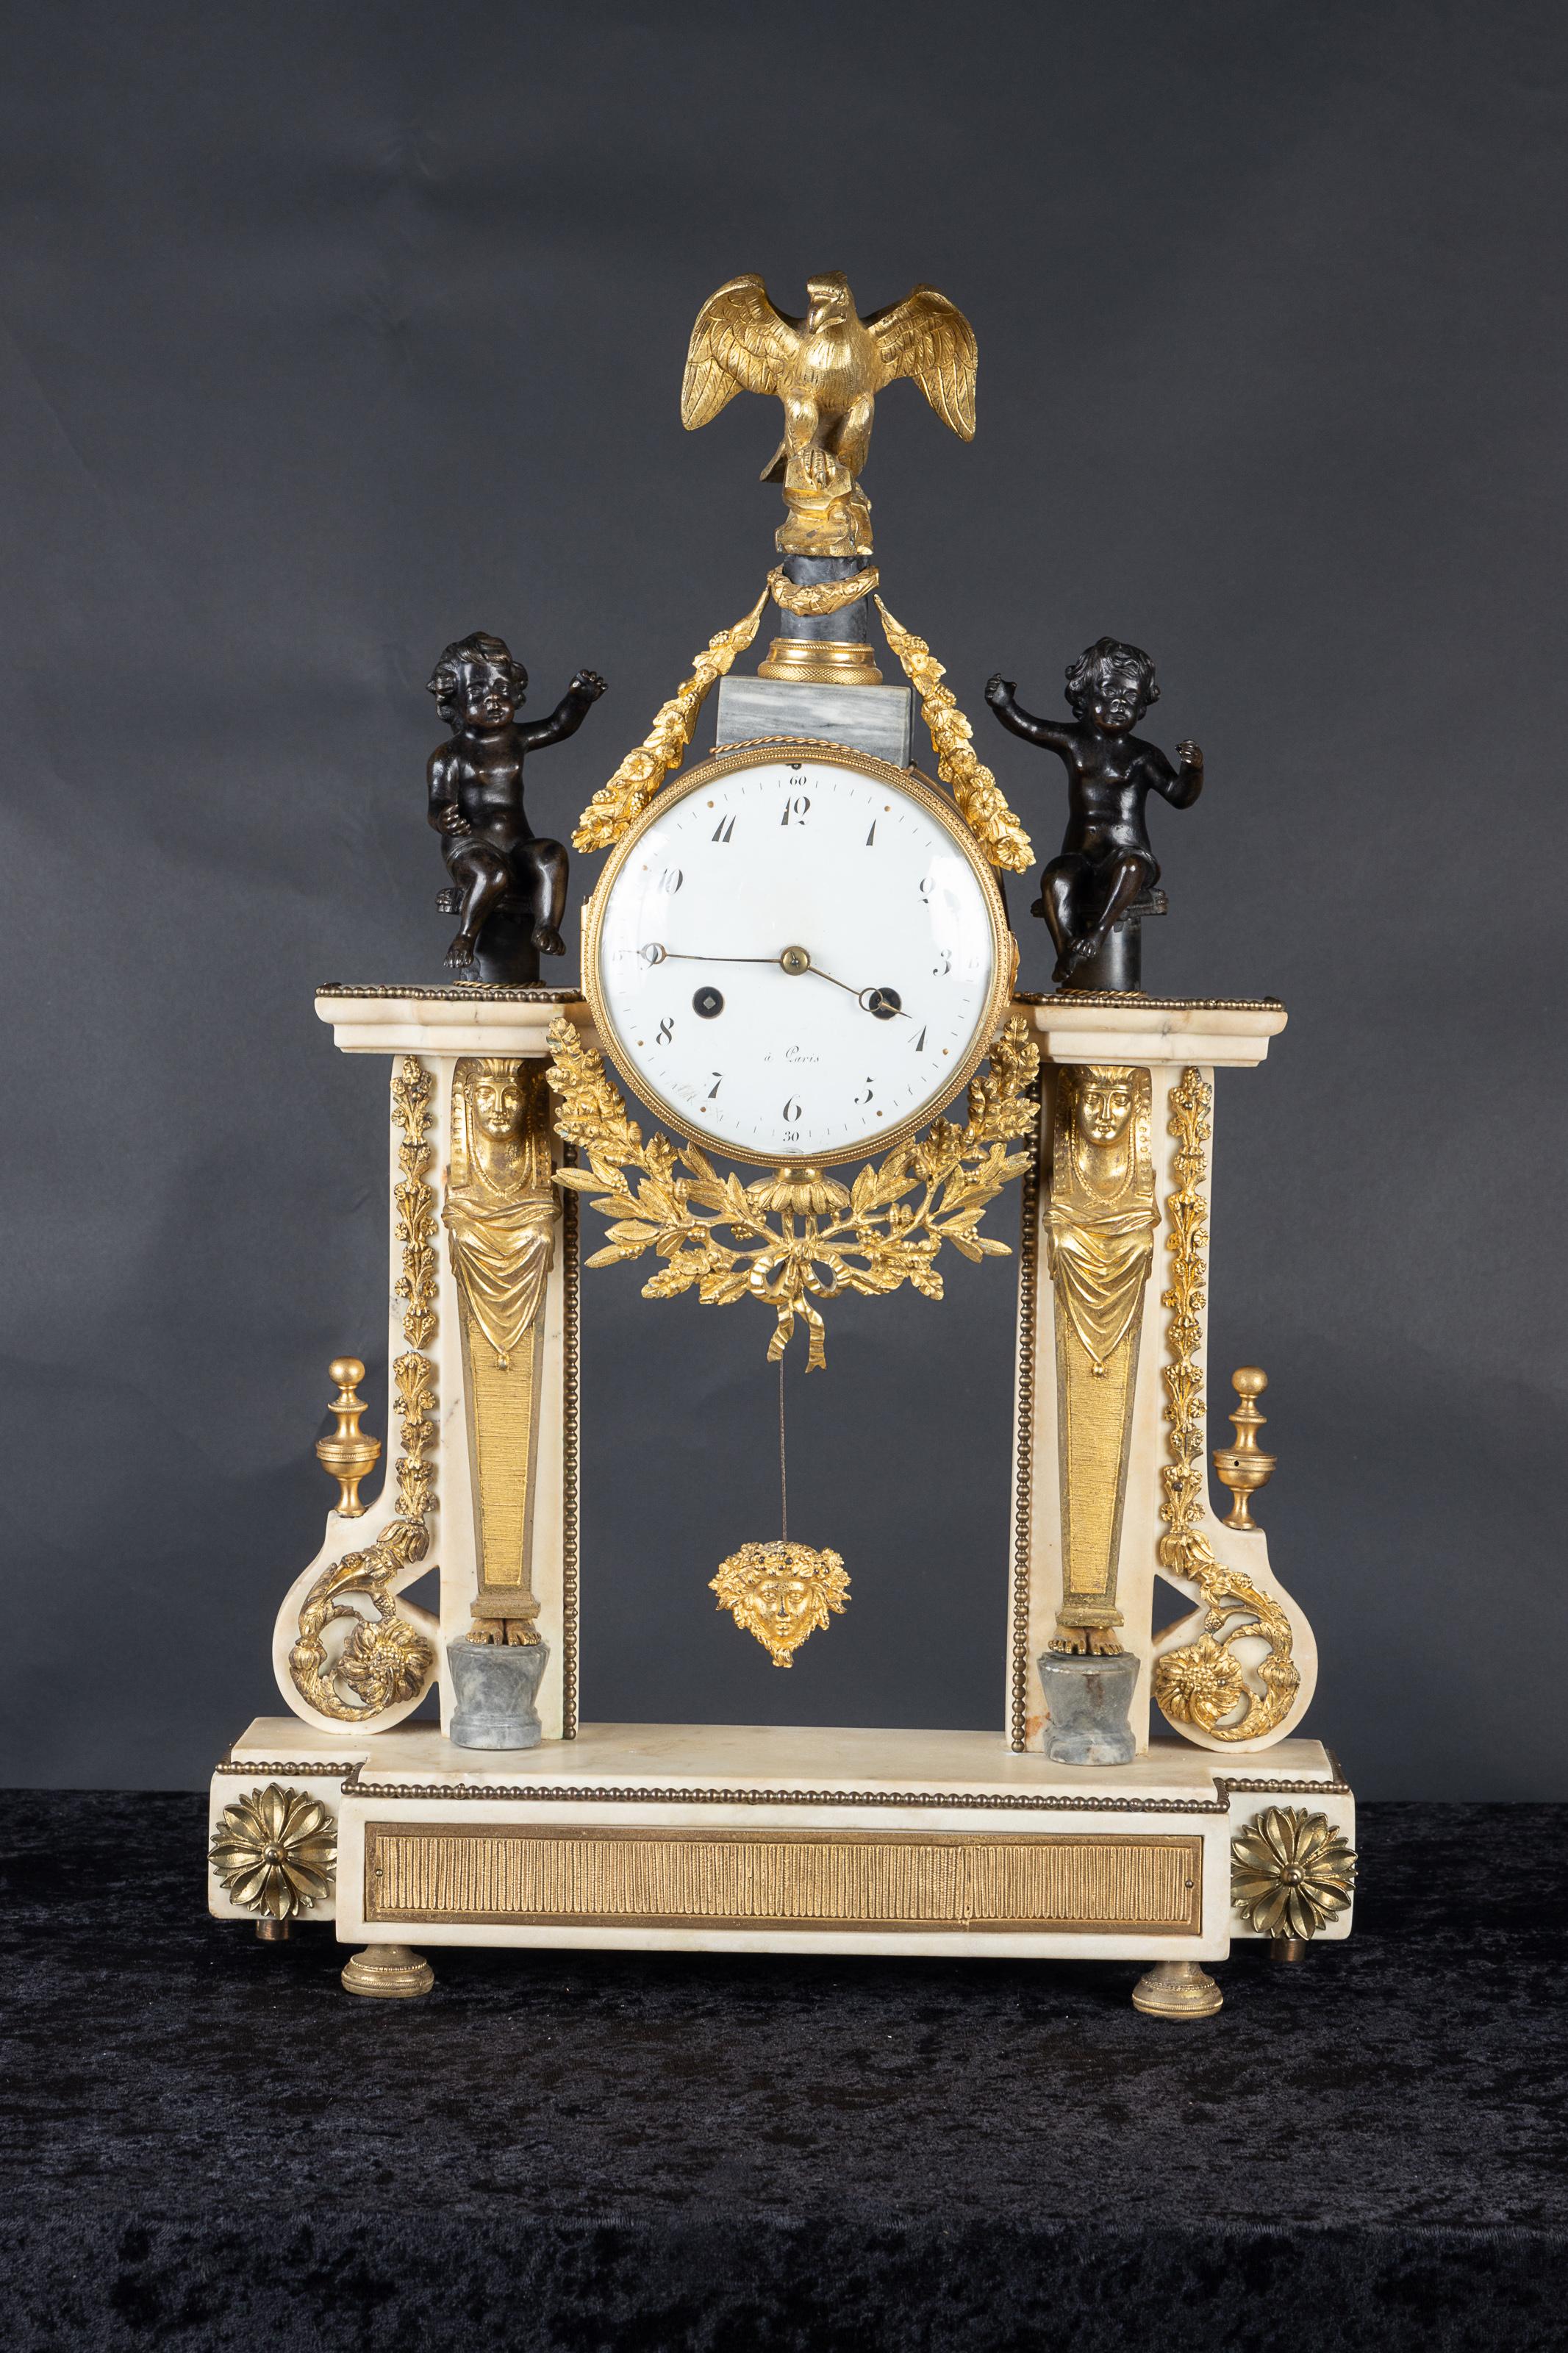 Magnificent French 19th century Empire white marble mantel clock adorned with bronze d’ore mounts in a floriate design. The piece features a female figure on either side wearing an Egyptian headdress, classic to the Empire style.   Round white